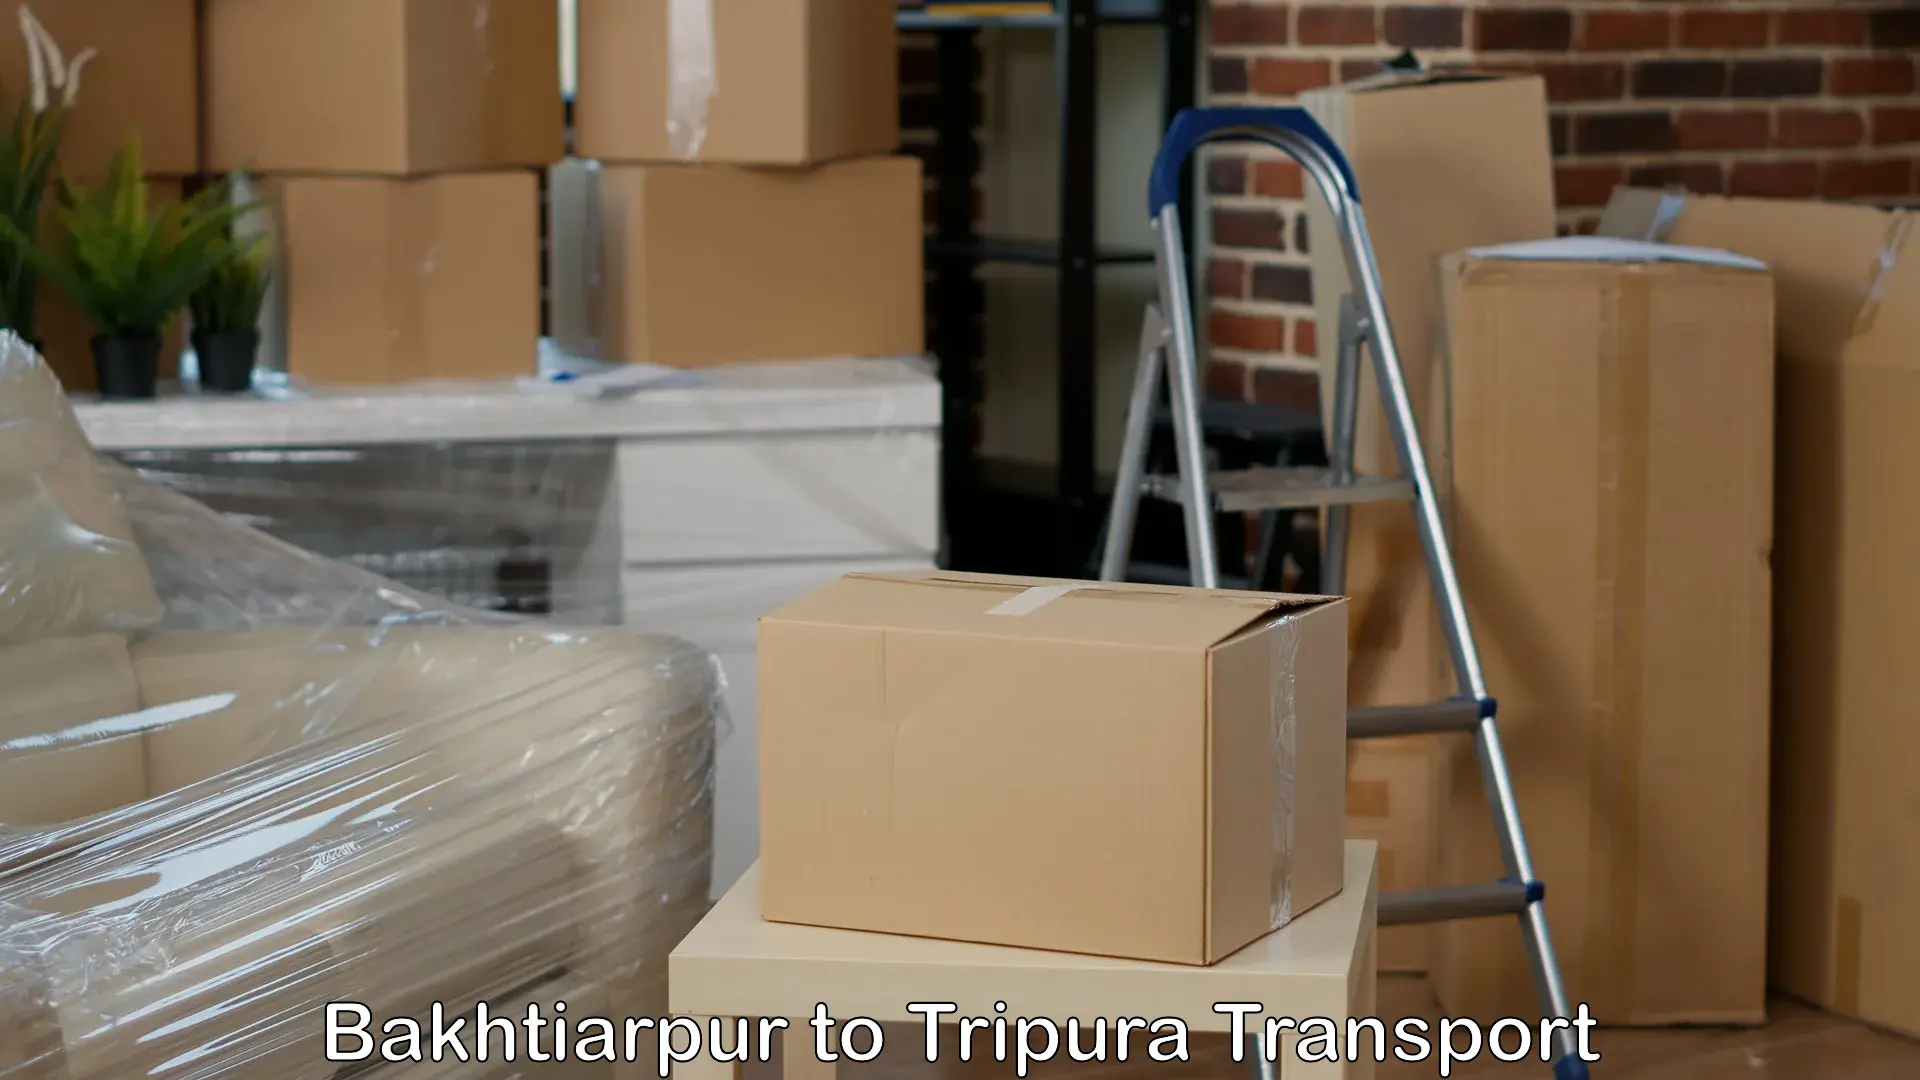 Package delivery services in Bakhtiarpur to Udaipur Tripura